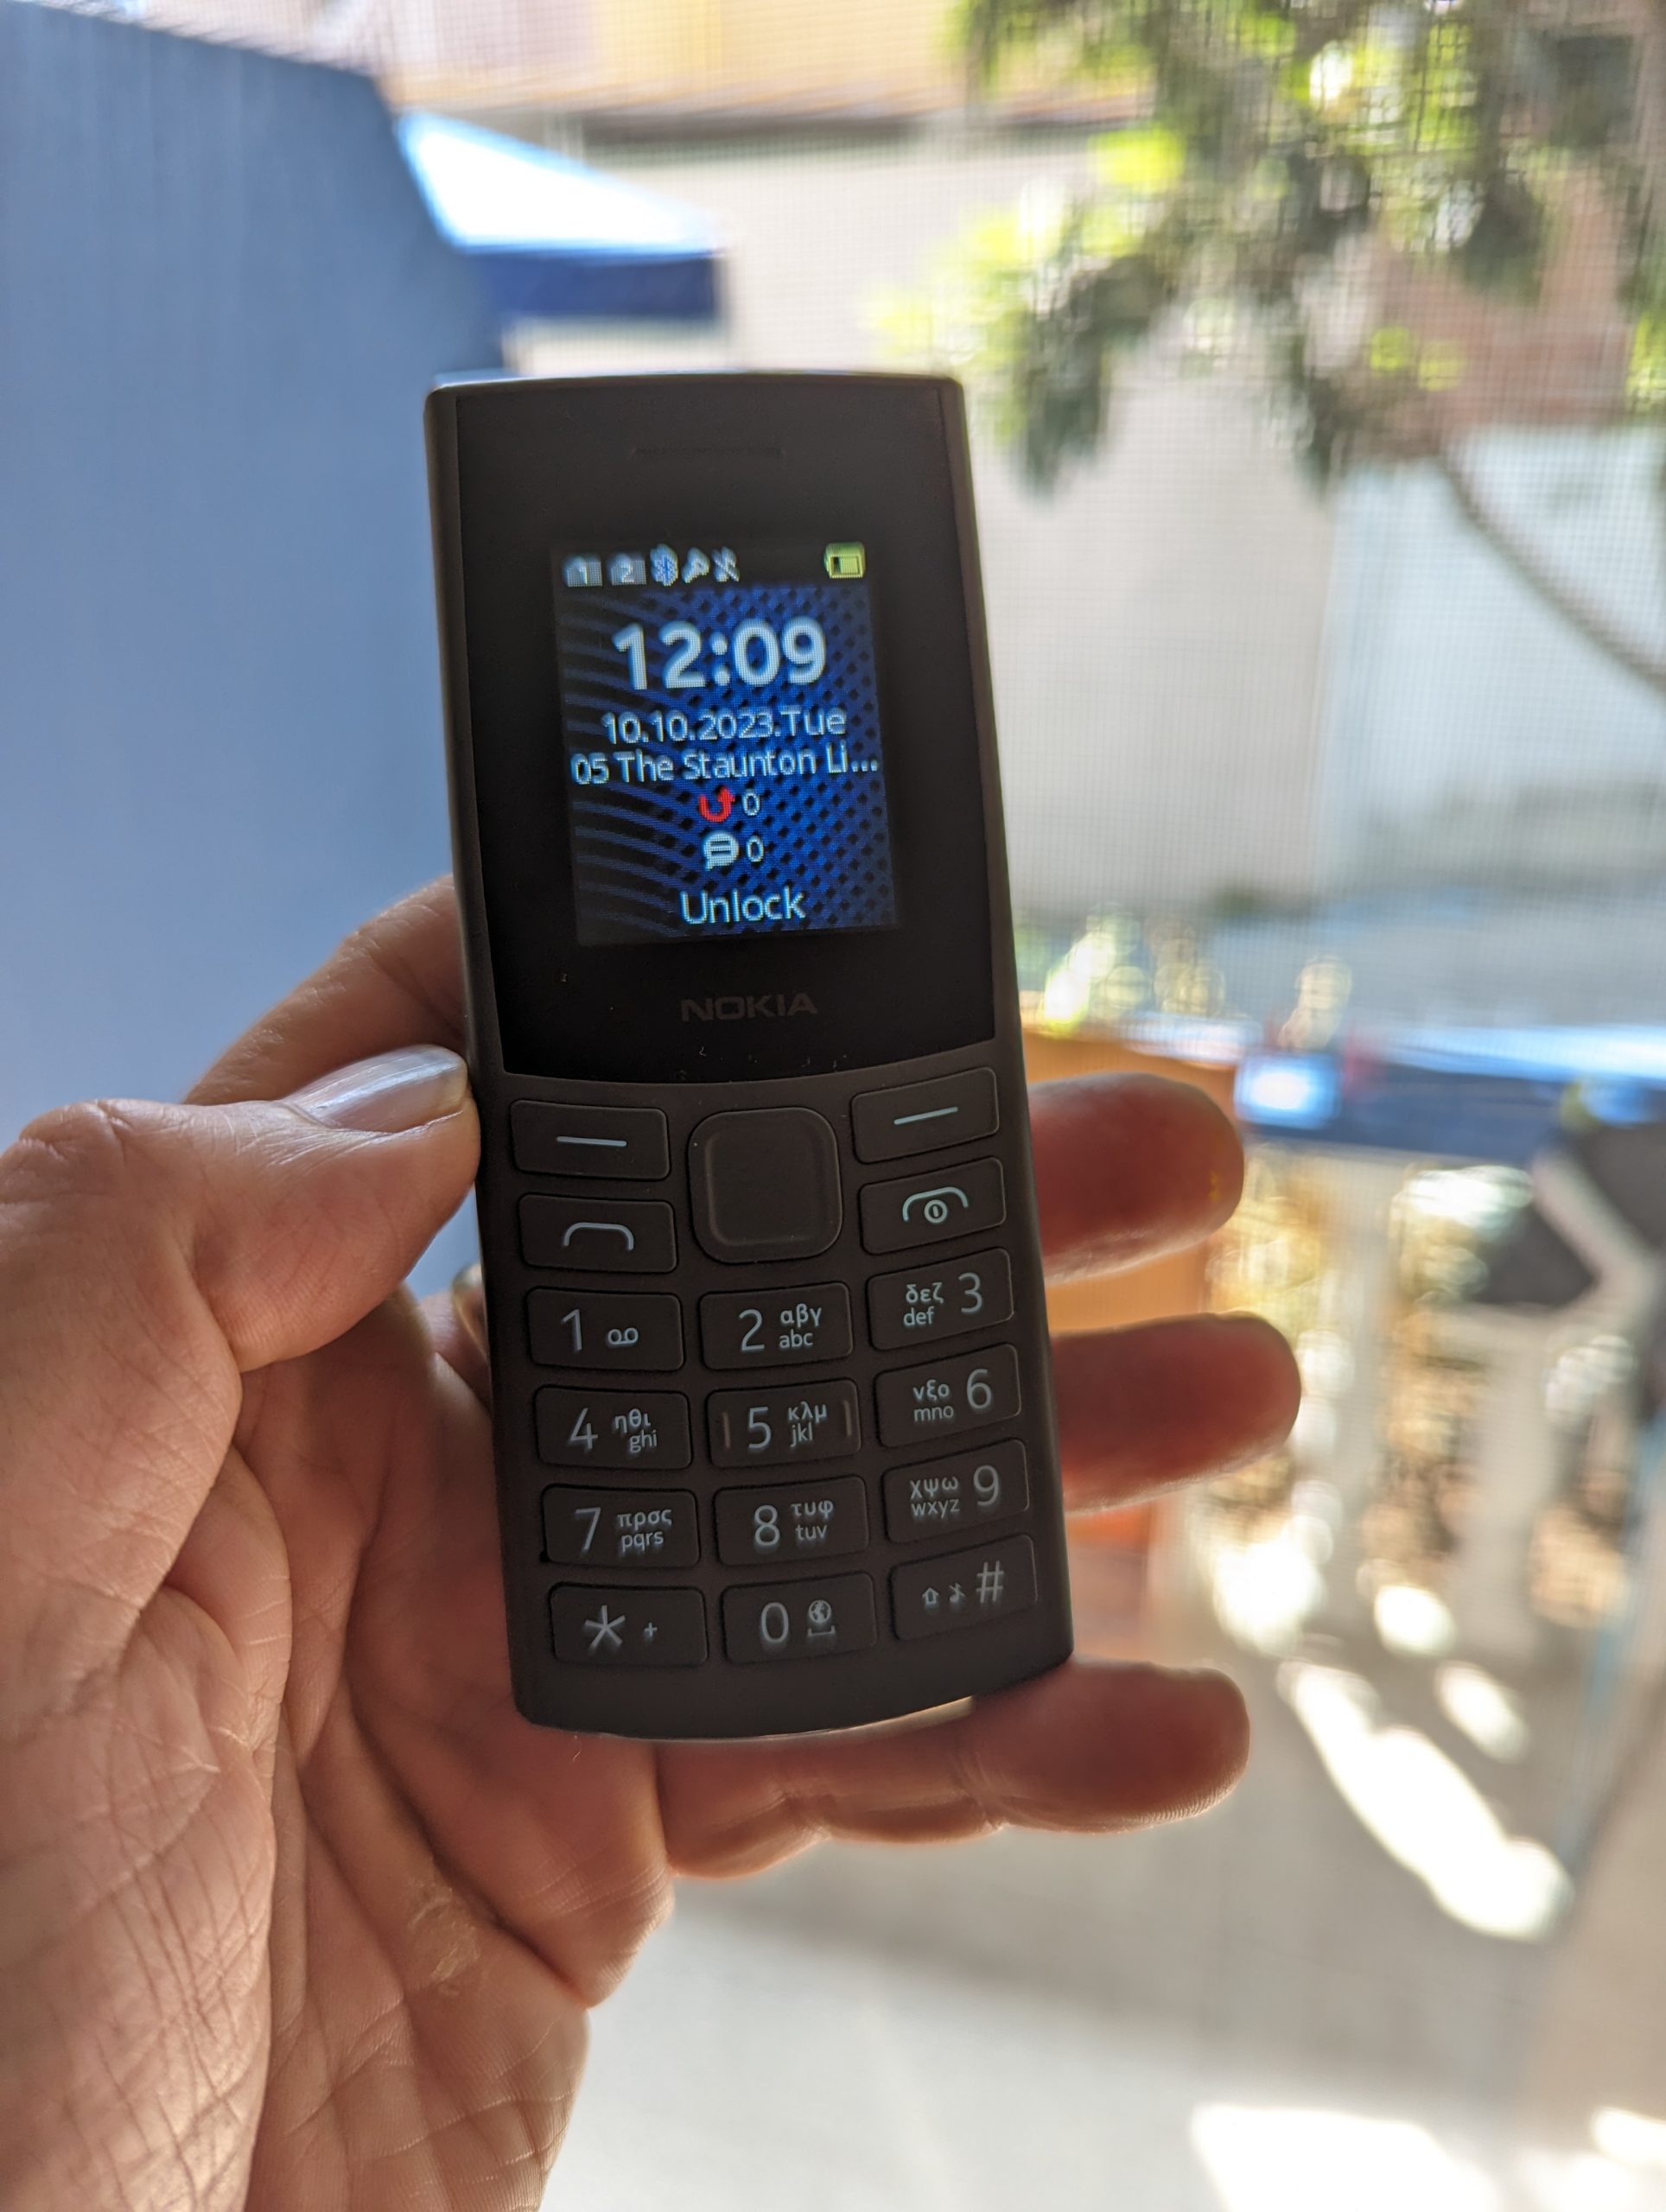 4G MP3, Nokia – more, Review grams under in 2023 80 105 and FM Browser,